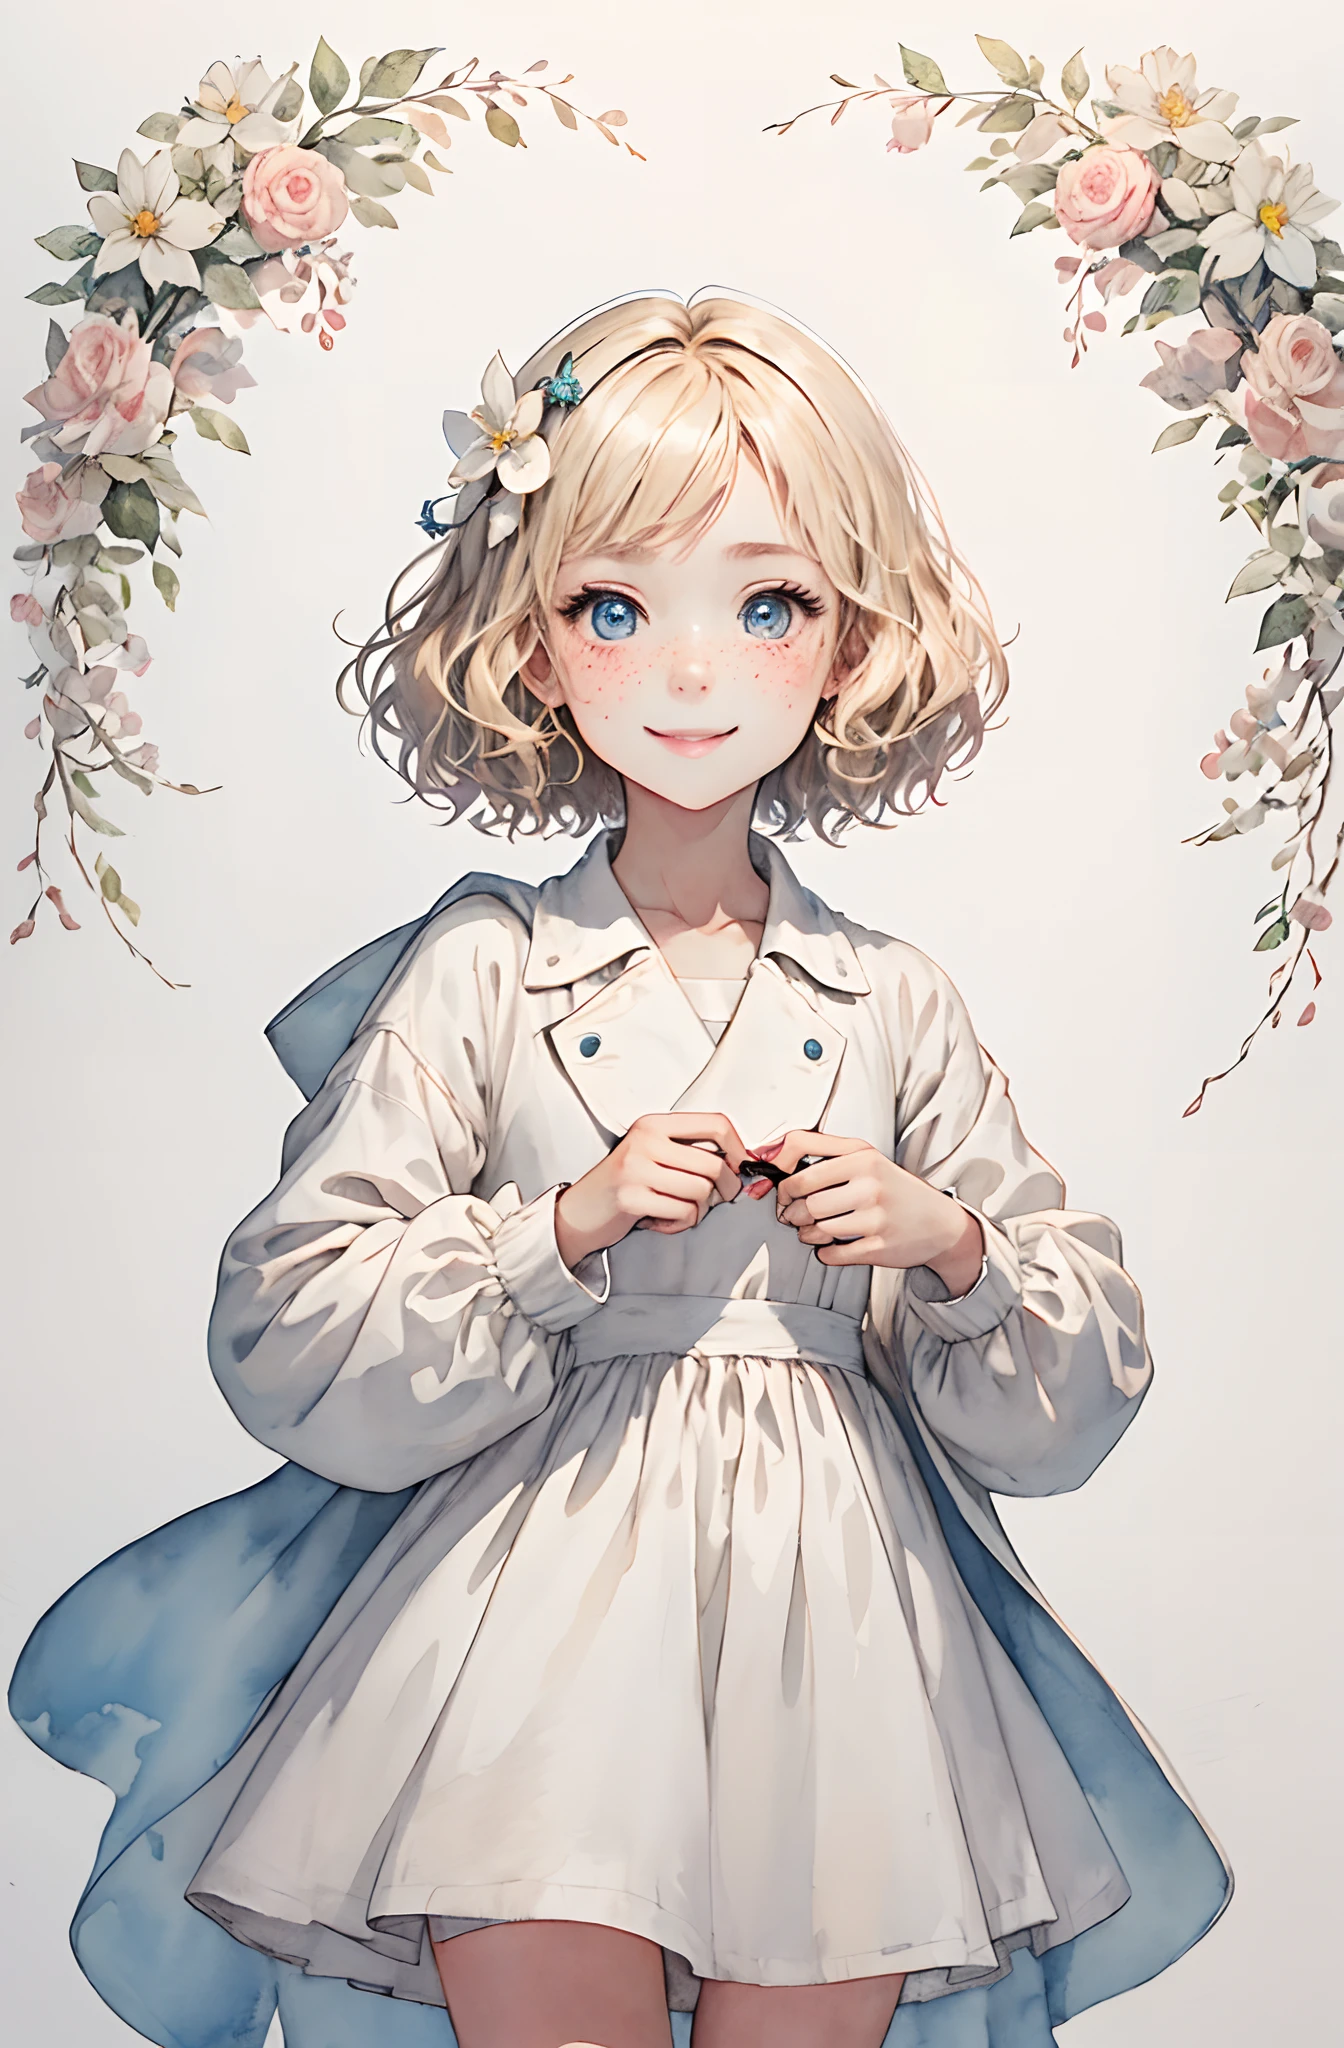 highest quality, pale skin, (face and eyes detail: 1.2), 1 girl, very delicate and beautiful girl, light blond, wavy short hair, blue eyes, snub nose, (slightly childish appearance), ((very beautiful)), (freckles: 0.4), curls, whole body, smile, happy, with white flowers, coat, white background, white world, she is standing, background is white, cute anime girl portraits, anime visual of a cute girl, anime girl in white dress, crisp clear rpg portrait, short hair, short curls hair, watercolor, watercolor painting,